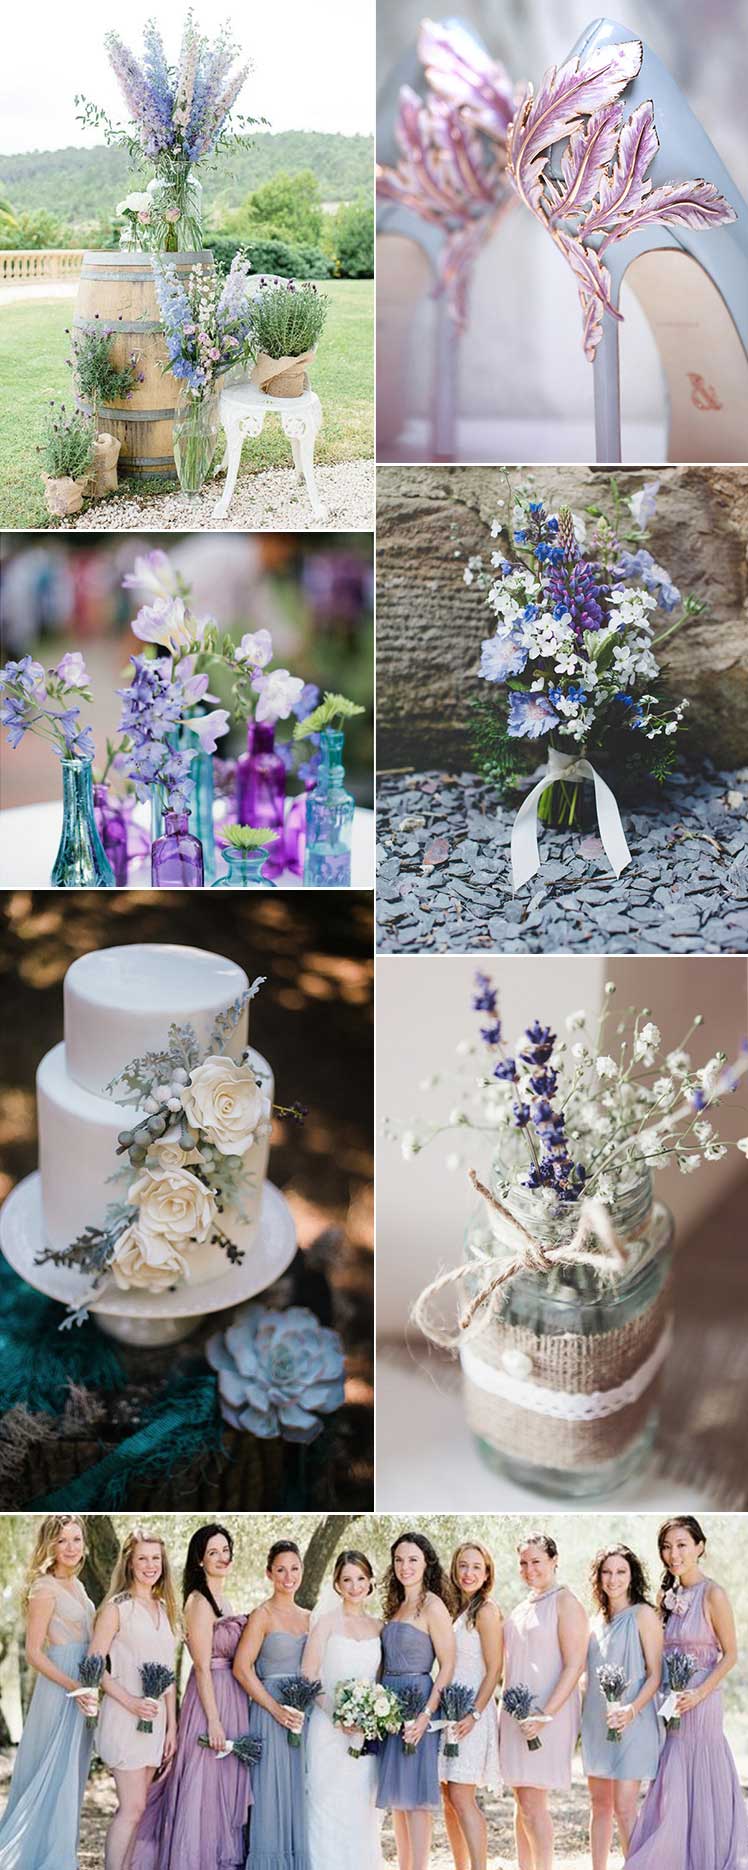 Lilac and Blue themed wedding ideas